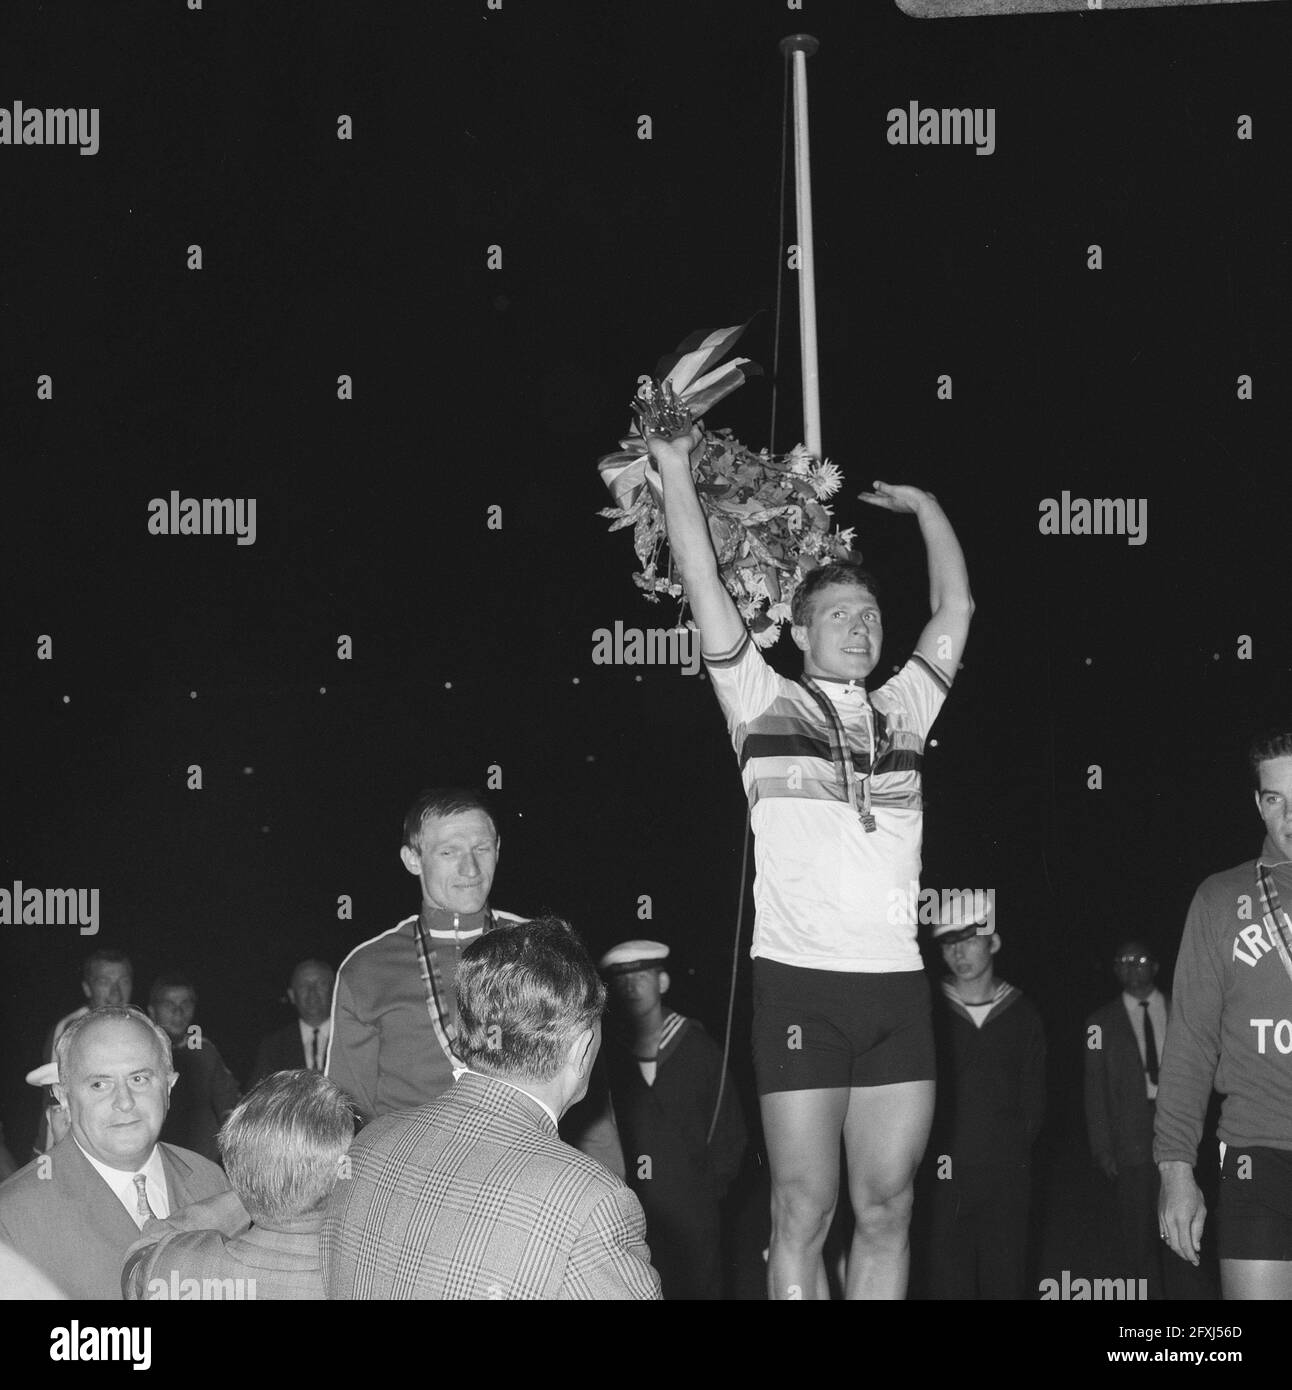 World Championships Cycling in Amsterdam. Dane Friedborg on the podium, August 23, 1967, WIELRENNEN, stages, The Netherlands, 20th century press agency photo, news to remember, documentary, historic photography 1945-1990, visual stories, human history of the Twentieth Century, capturing moments in time Stock Photo